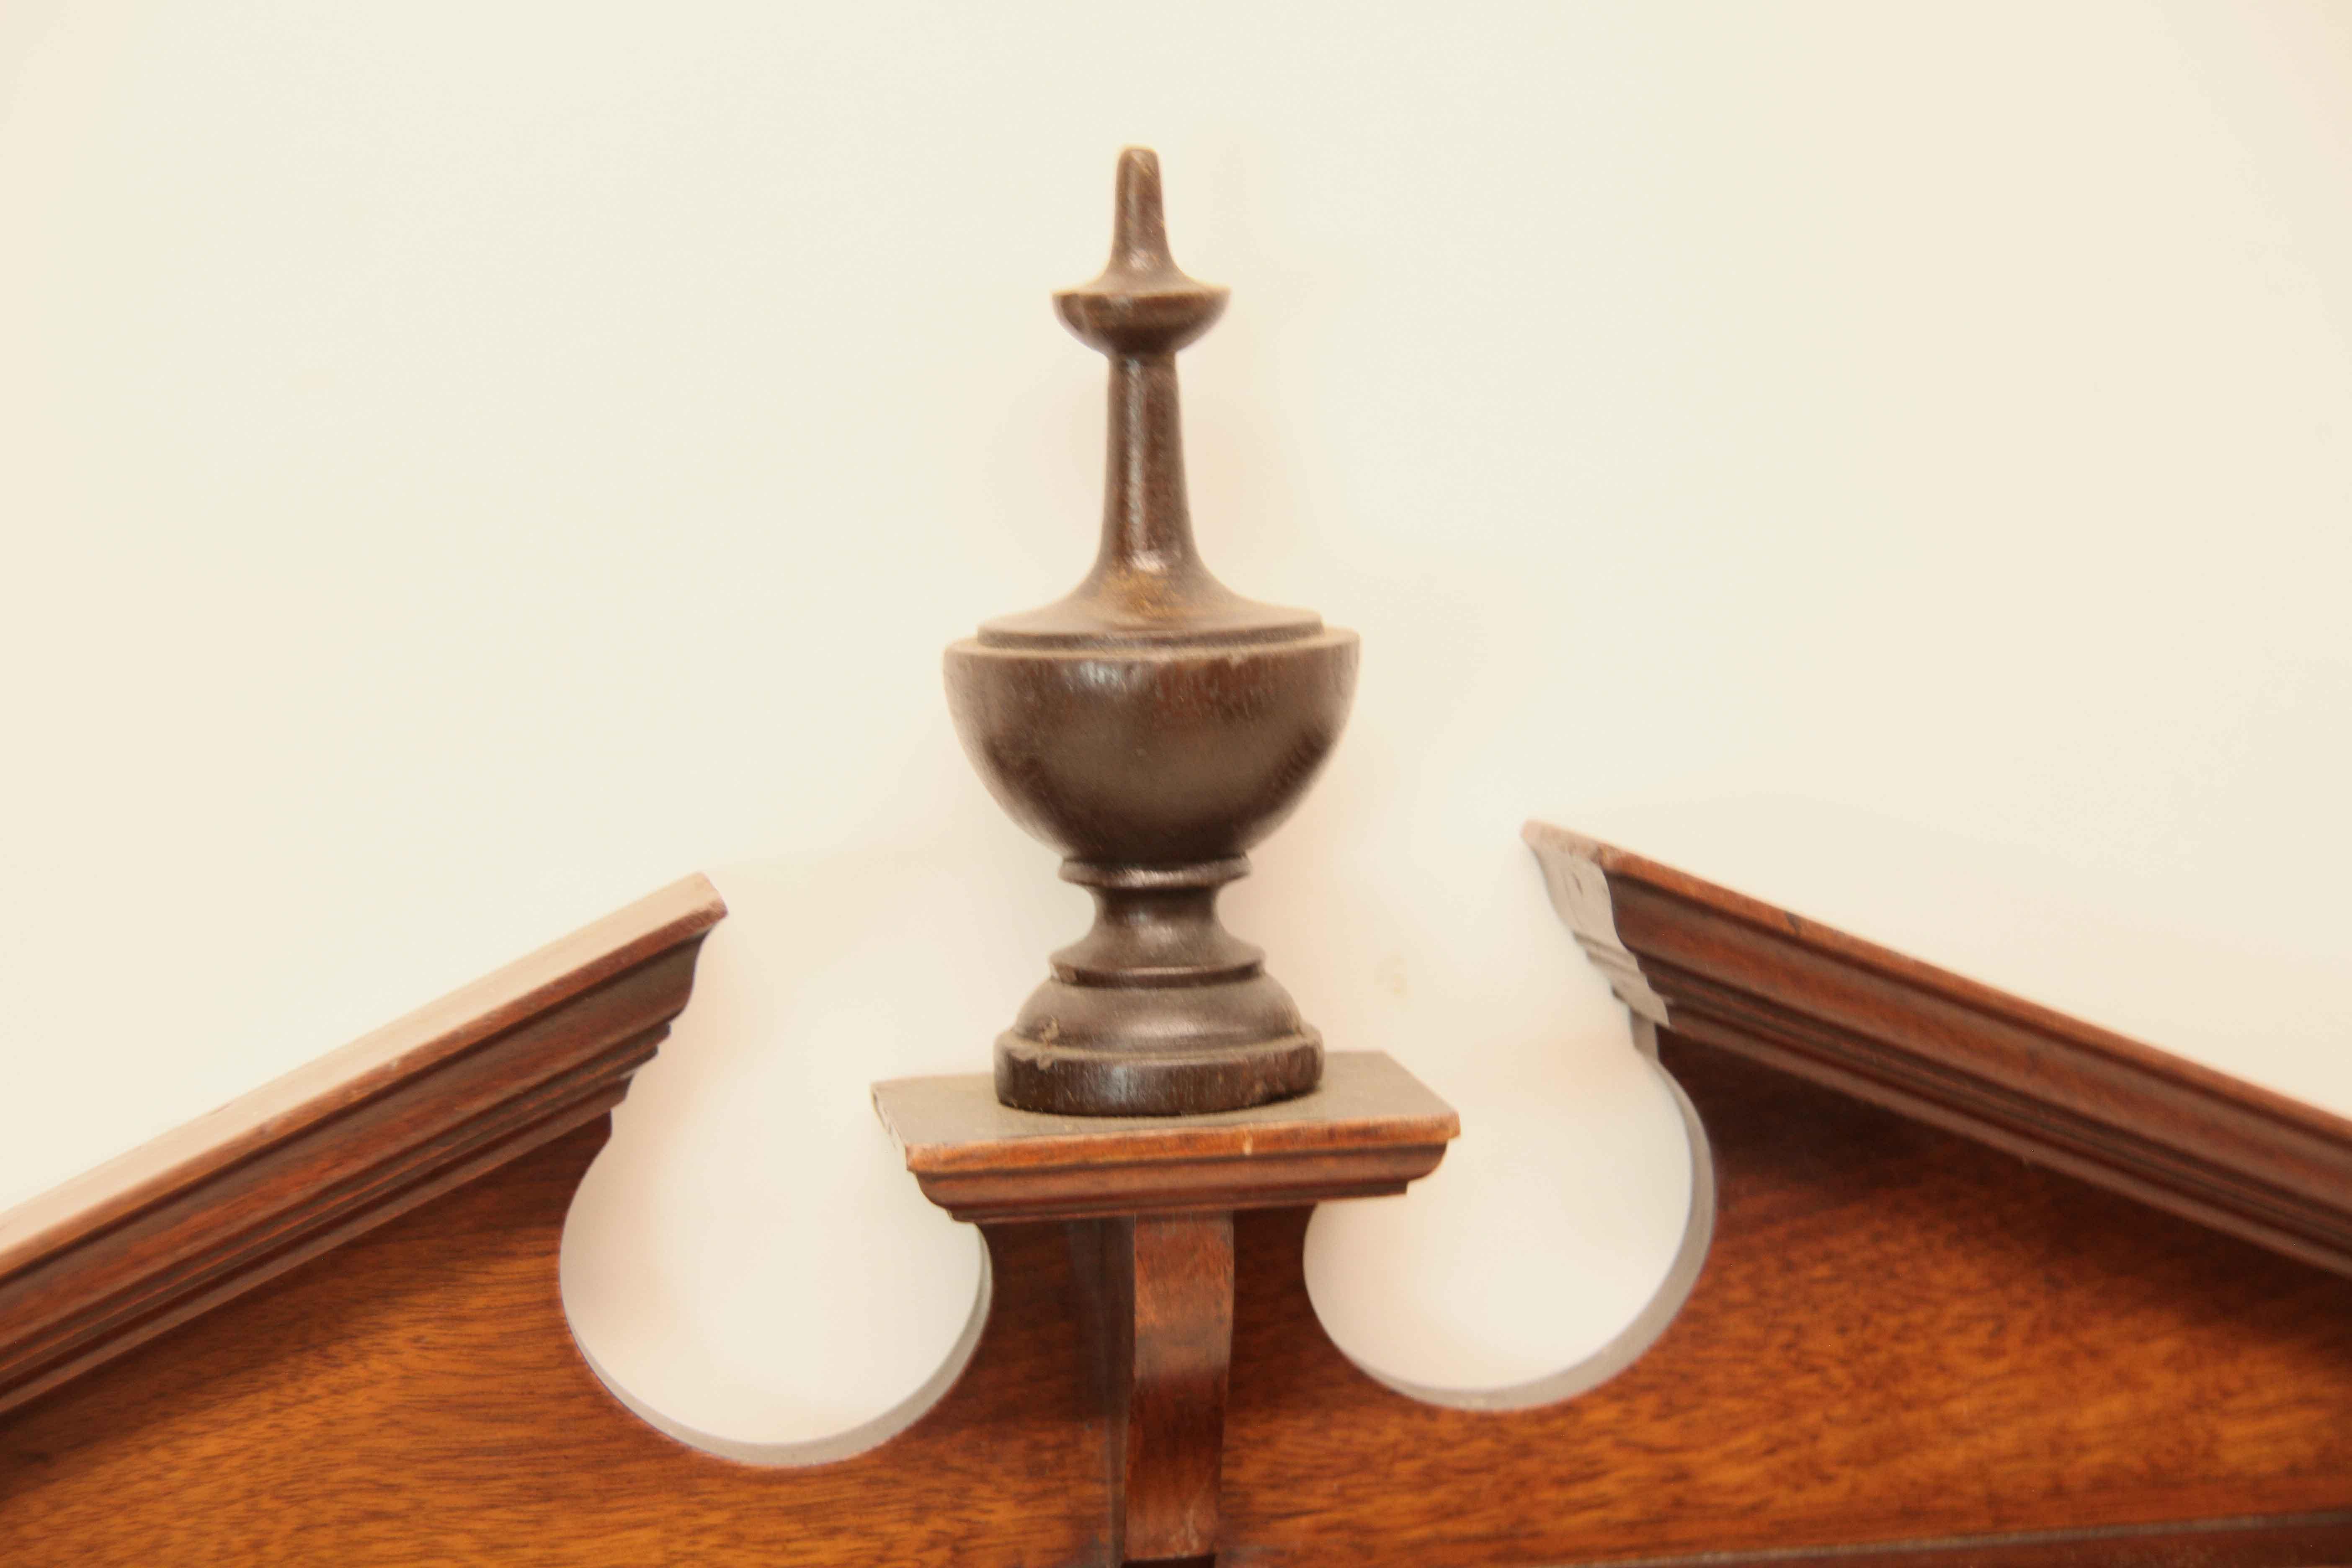 English mahogany mirror, the broken arch pediment with urn finial on plinth, sides have reeded pilasters , bottom of mirror features a one piece series of molding shapes that recede .   